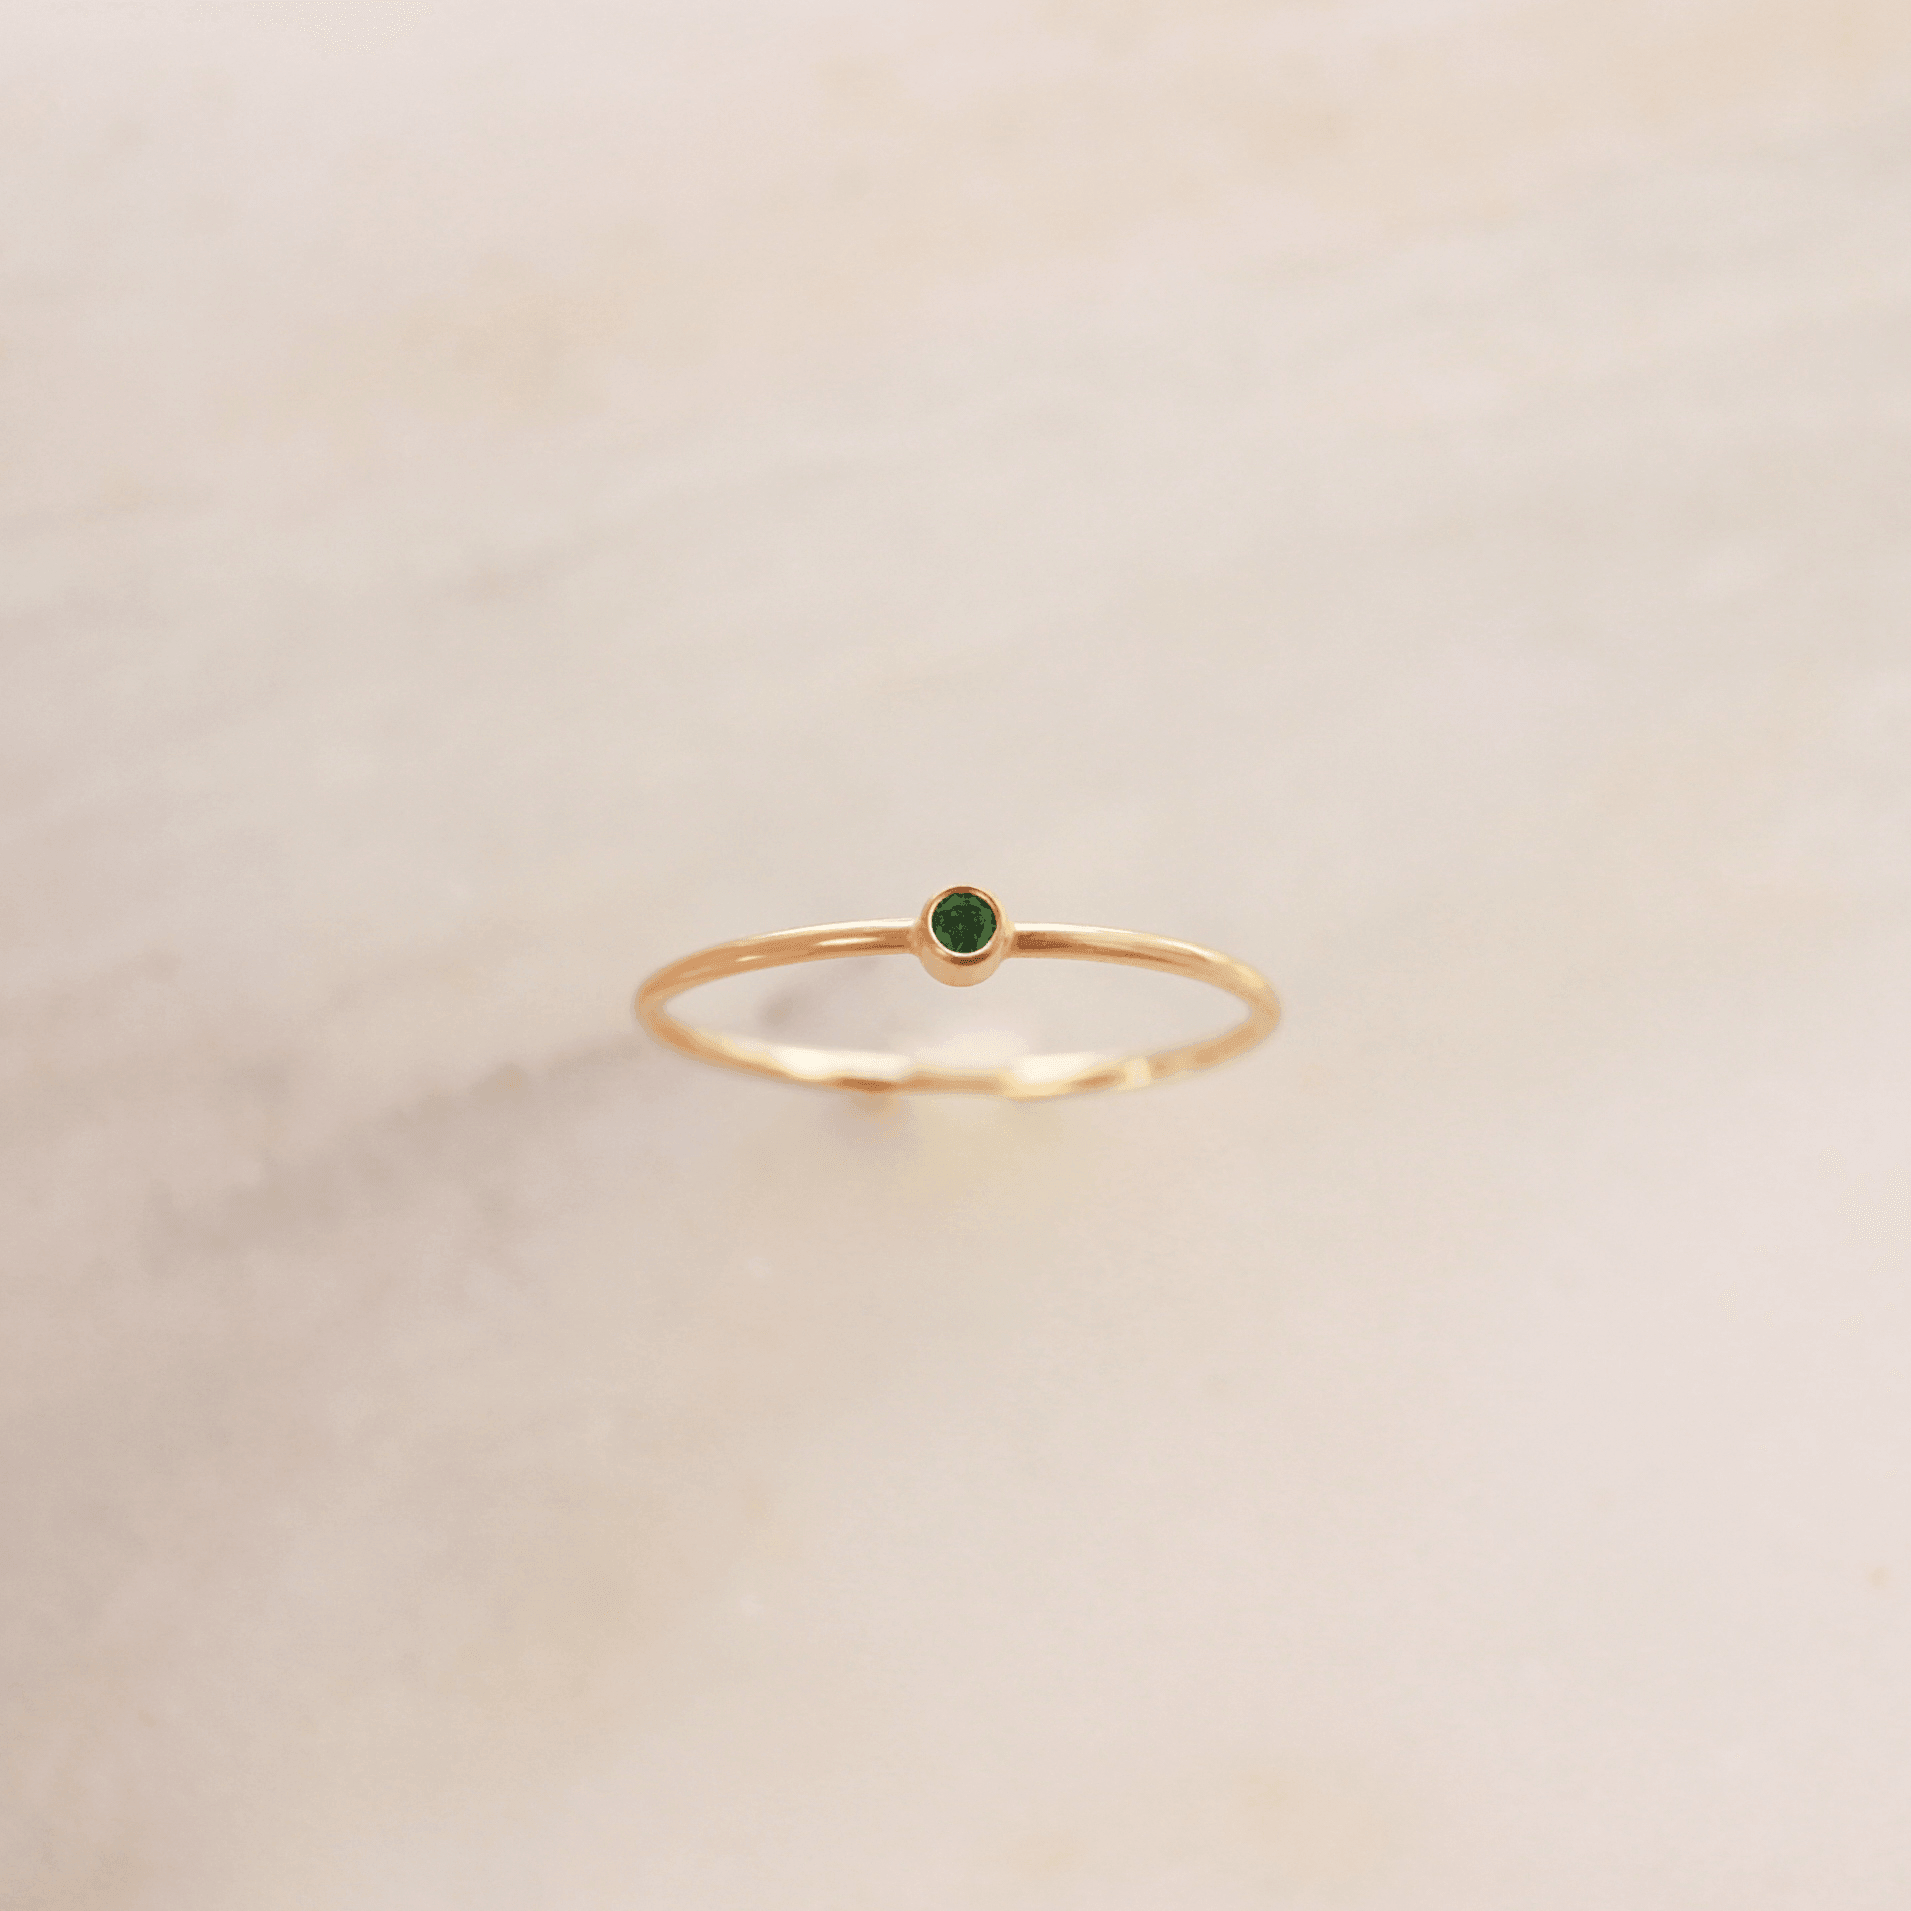 Tiny May Birthstone Ring ∙ Emerald - Nolia Jewelry - Meaningful + Sustainably Handcrafted Jewelry